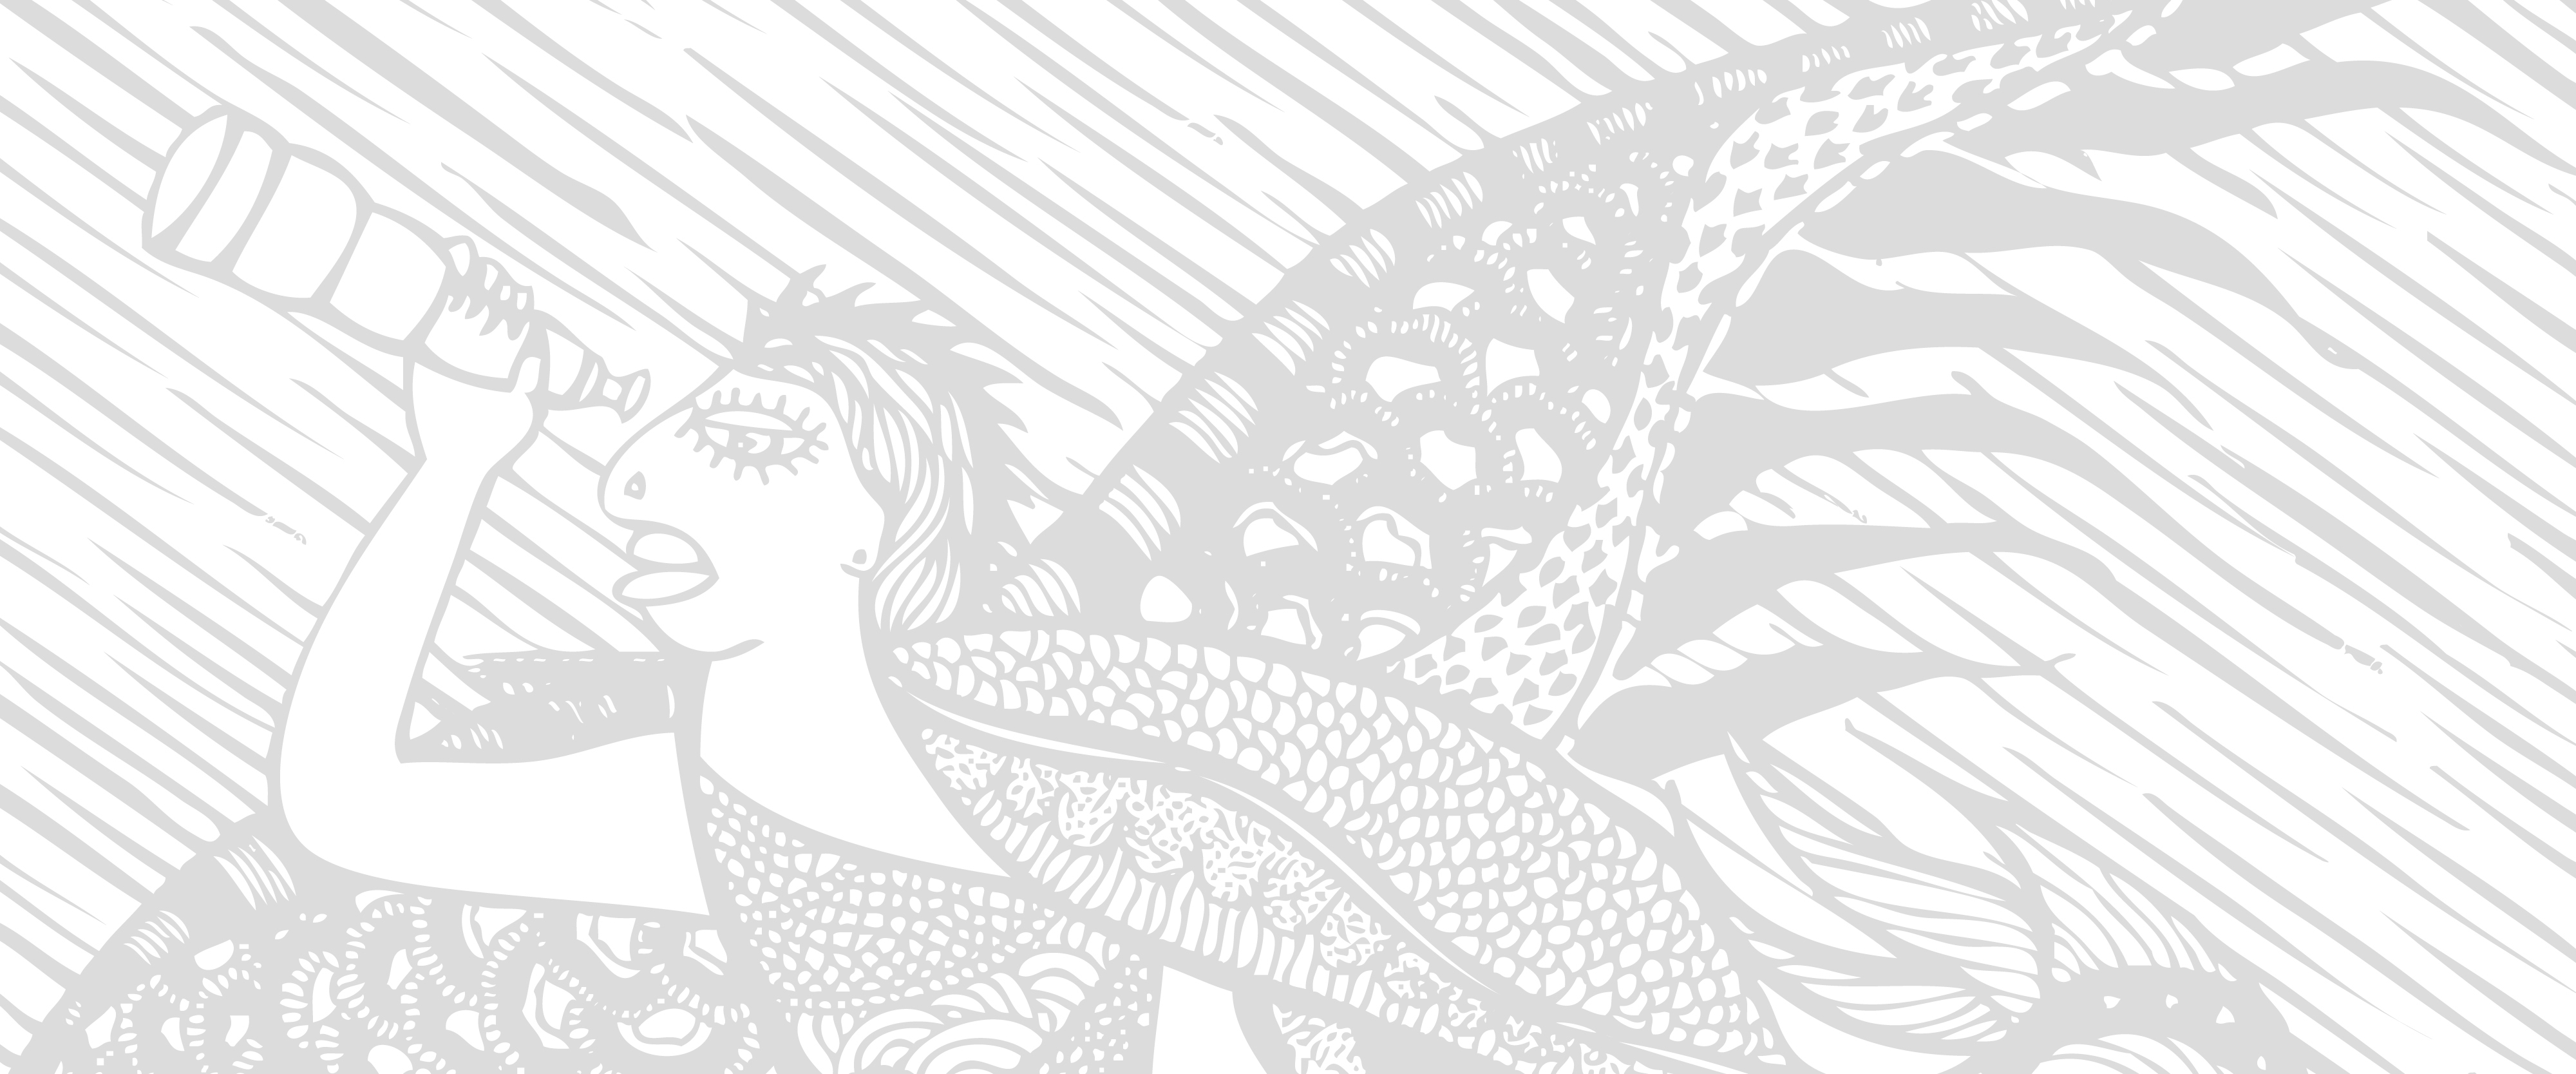 gray woodcut style digital design of a woman looking through a telescope with bird wings